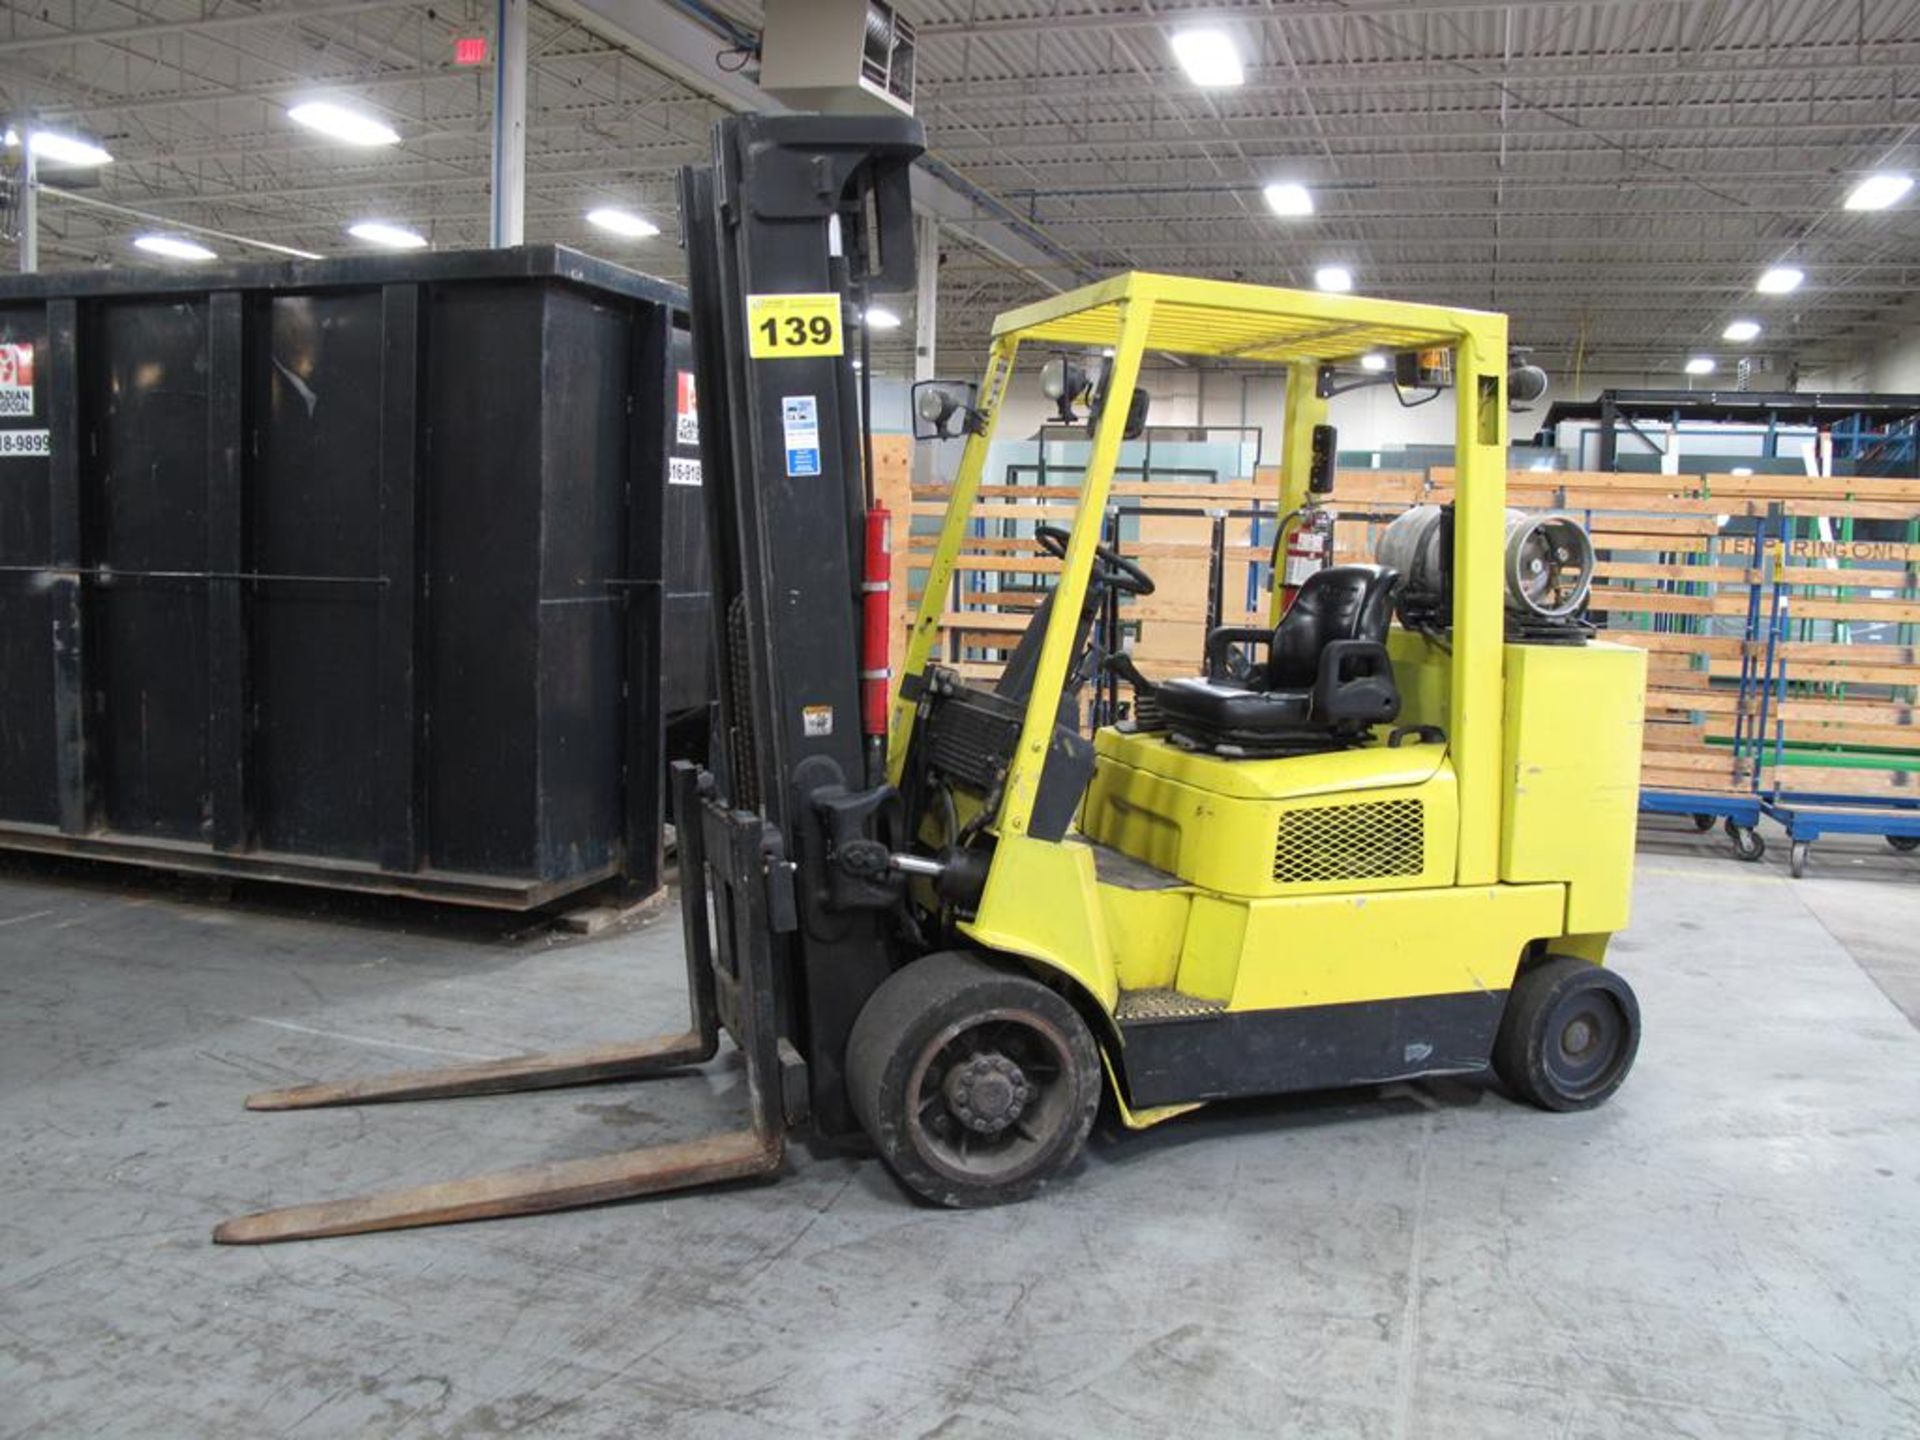 HYSTER, S120XMS-PRS, 12,000 LBS, 3 STAGE, LPG FORKLIFT, 48" FORKS, 208" MAXIMUM LIFT, 9,701 HOURS,